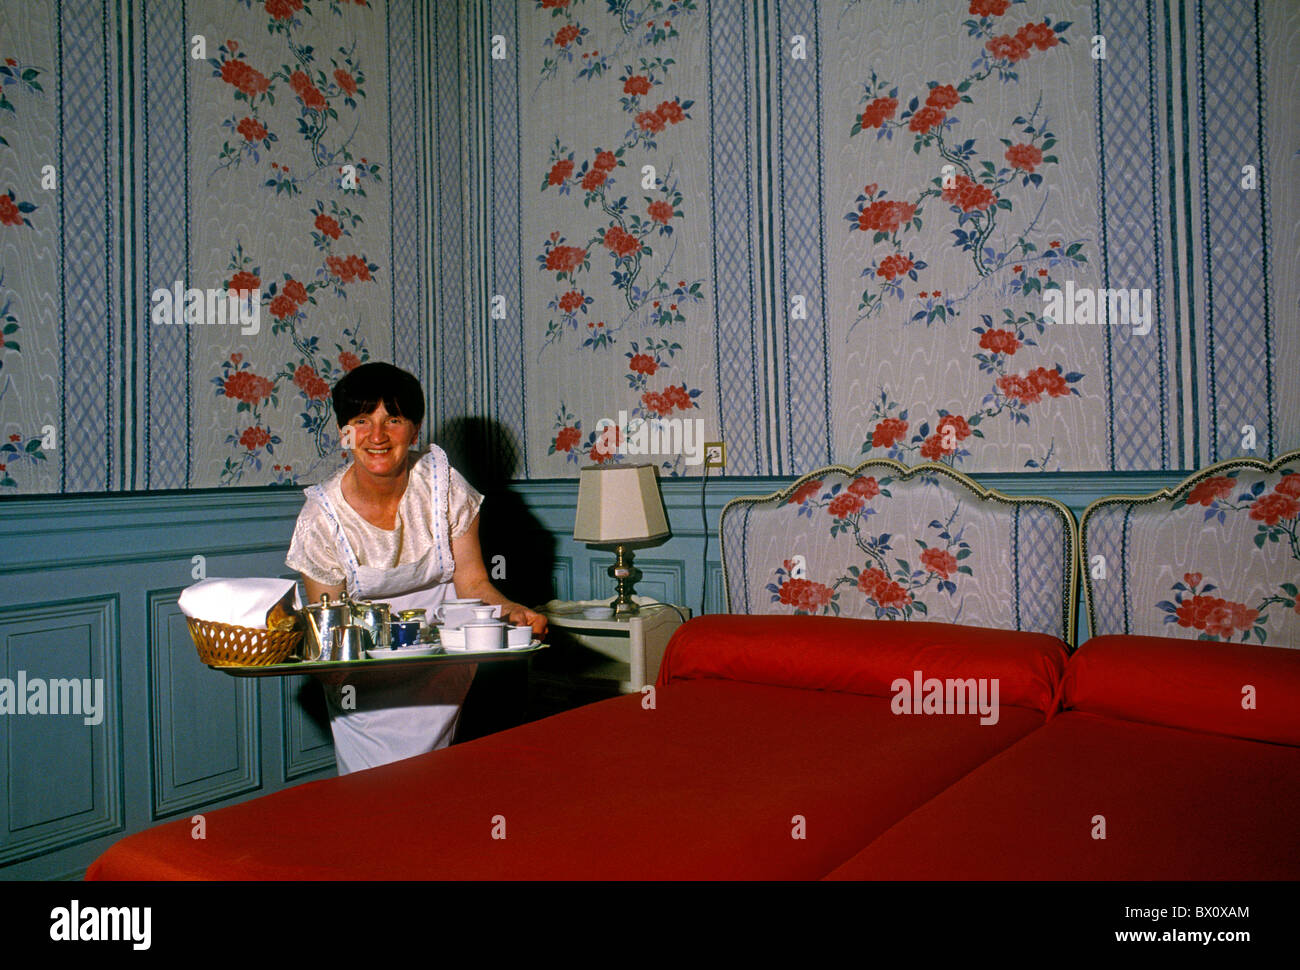 1, one, French maid, maid, French woman, room service, Chateau d'Isenbourg, Rouffach, Alsace, France, Europe Stock Photo